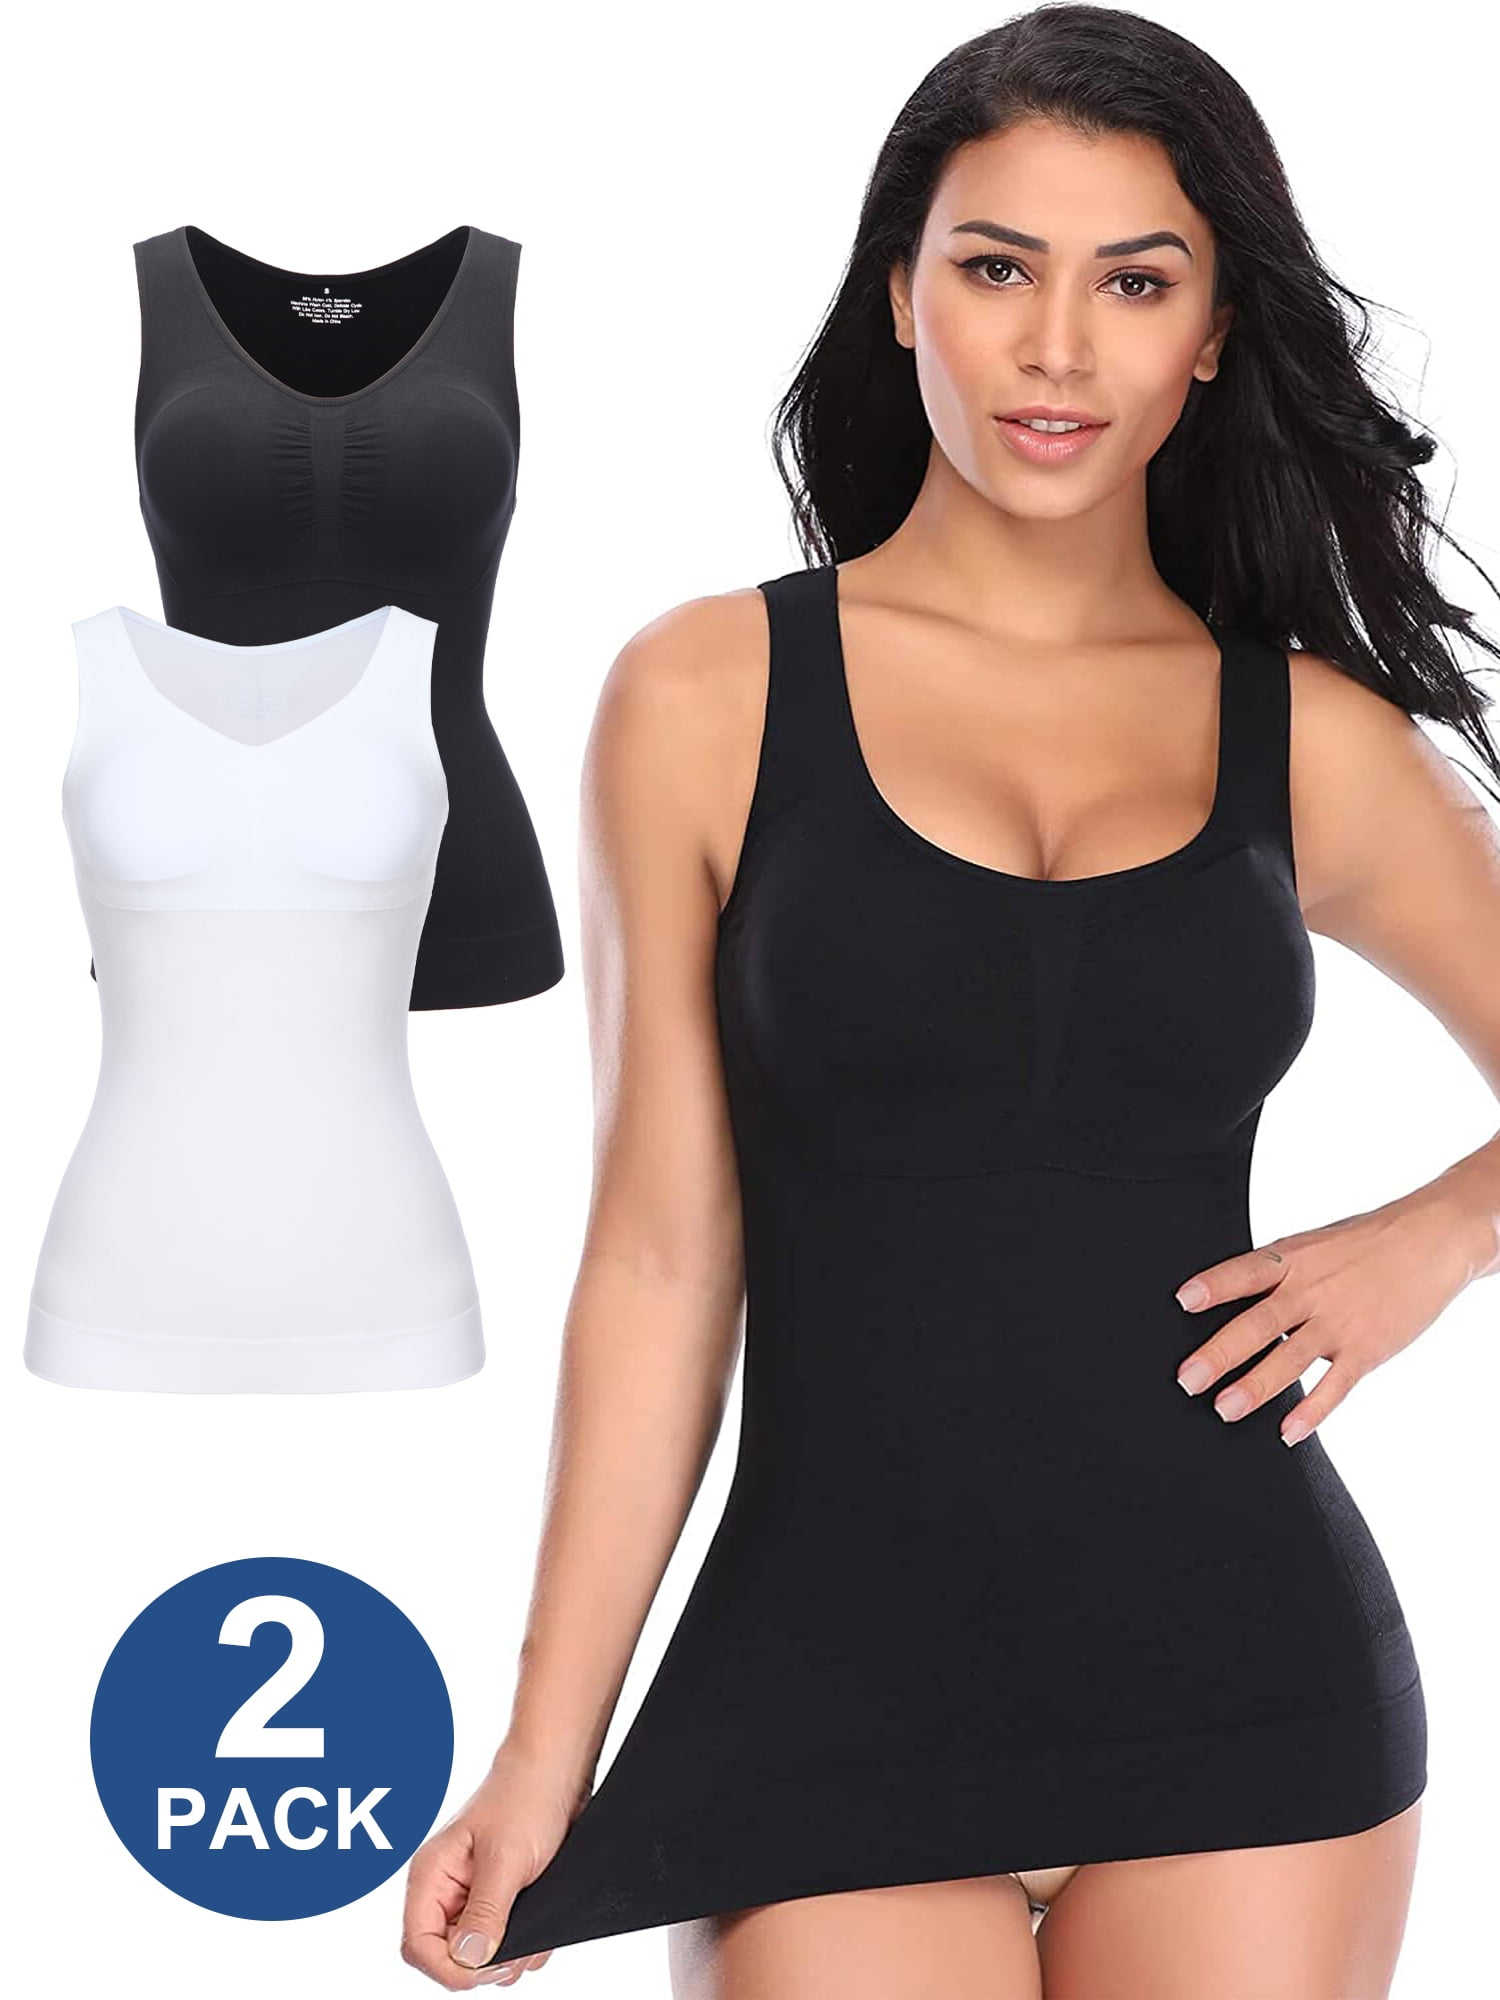 Shapewear Tank Tops for Women Tummy Control cami with Built in Bra Slimming Lace Compression Top Vest Body Shaper